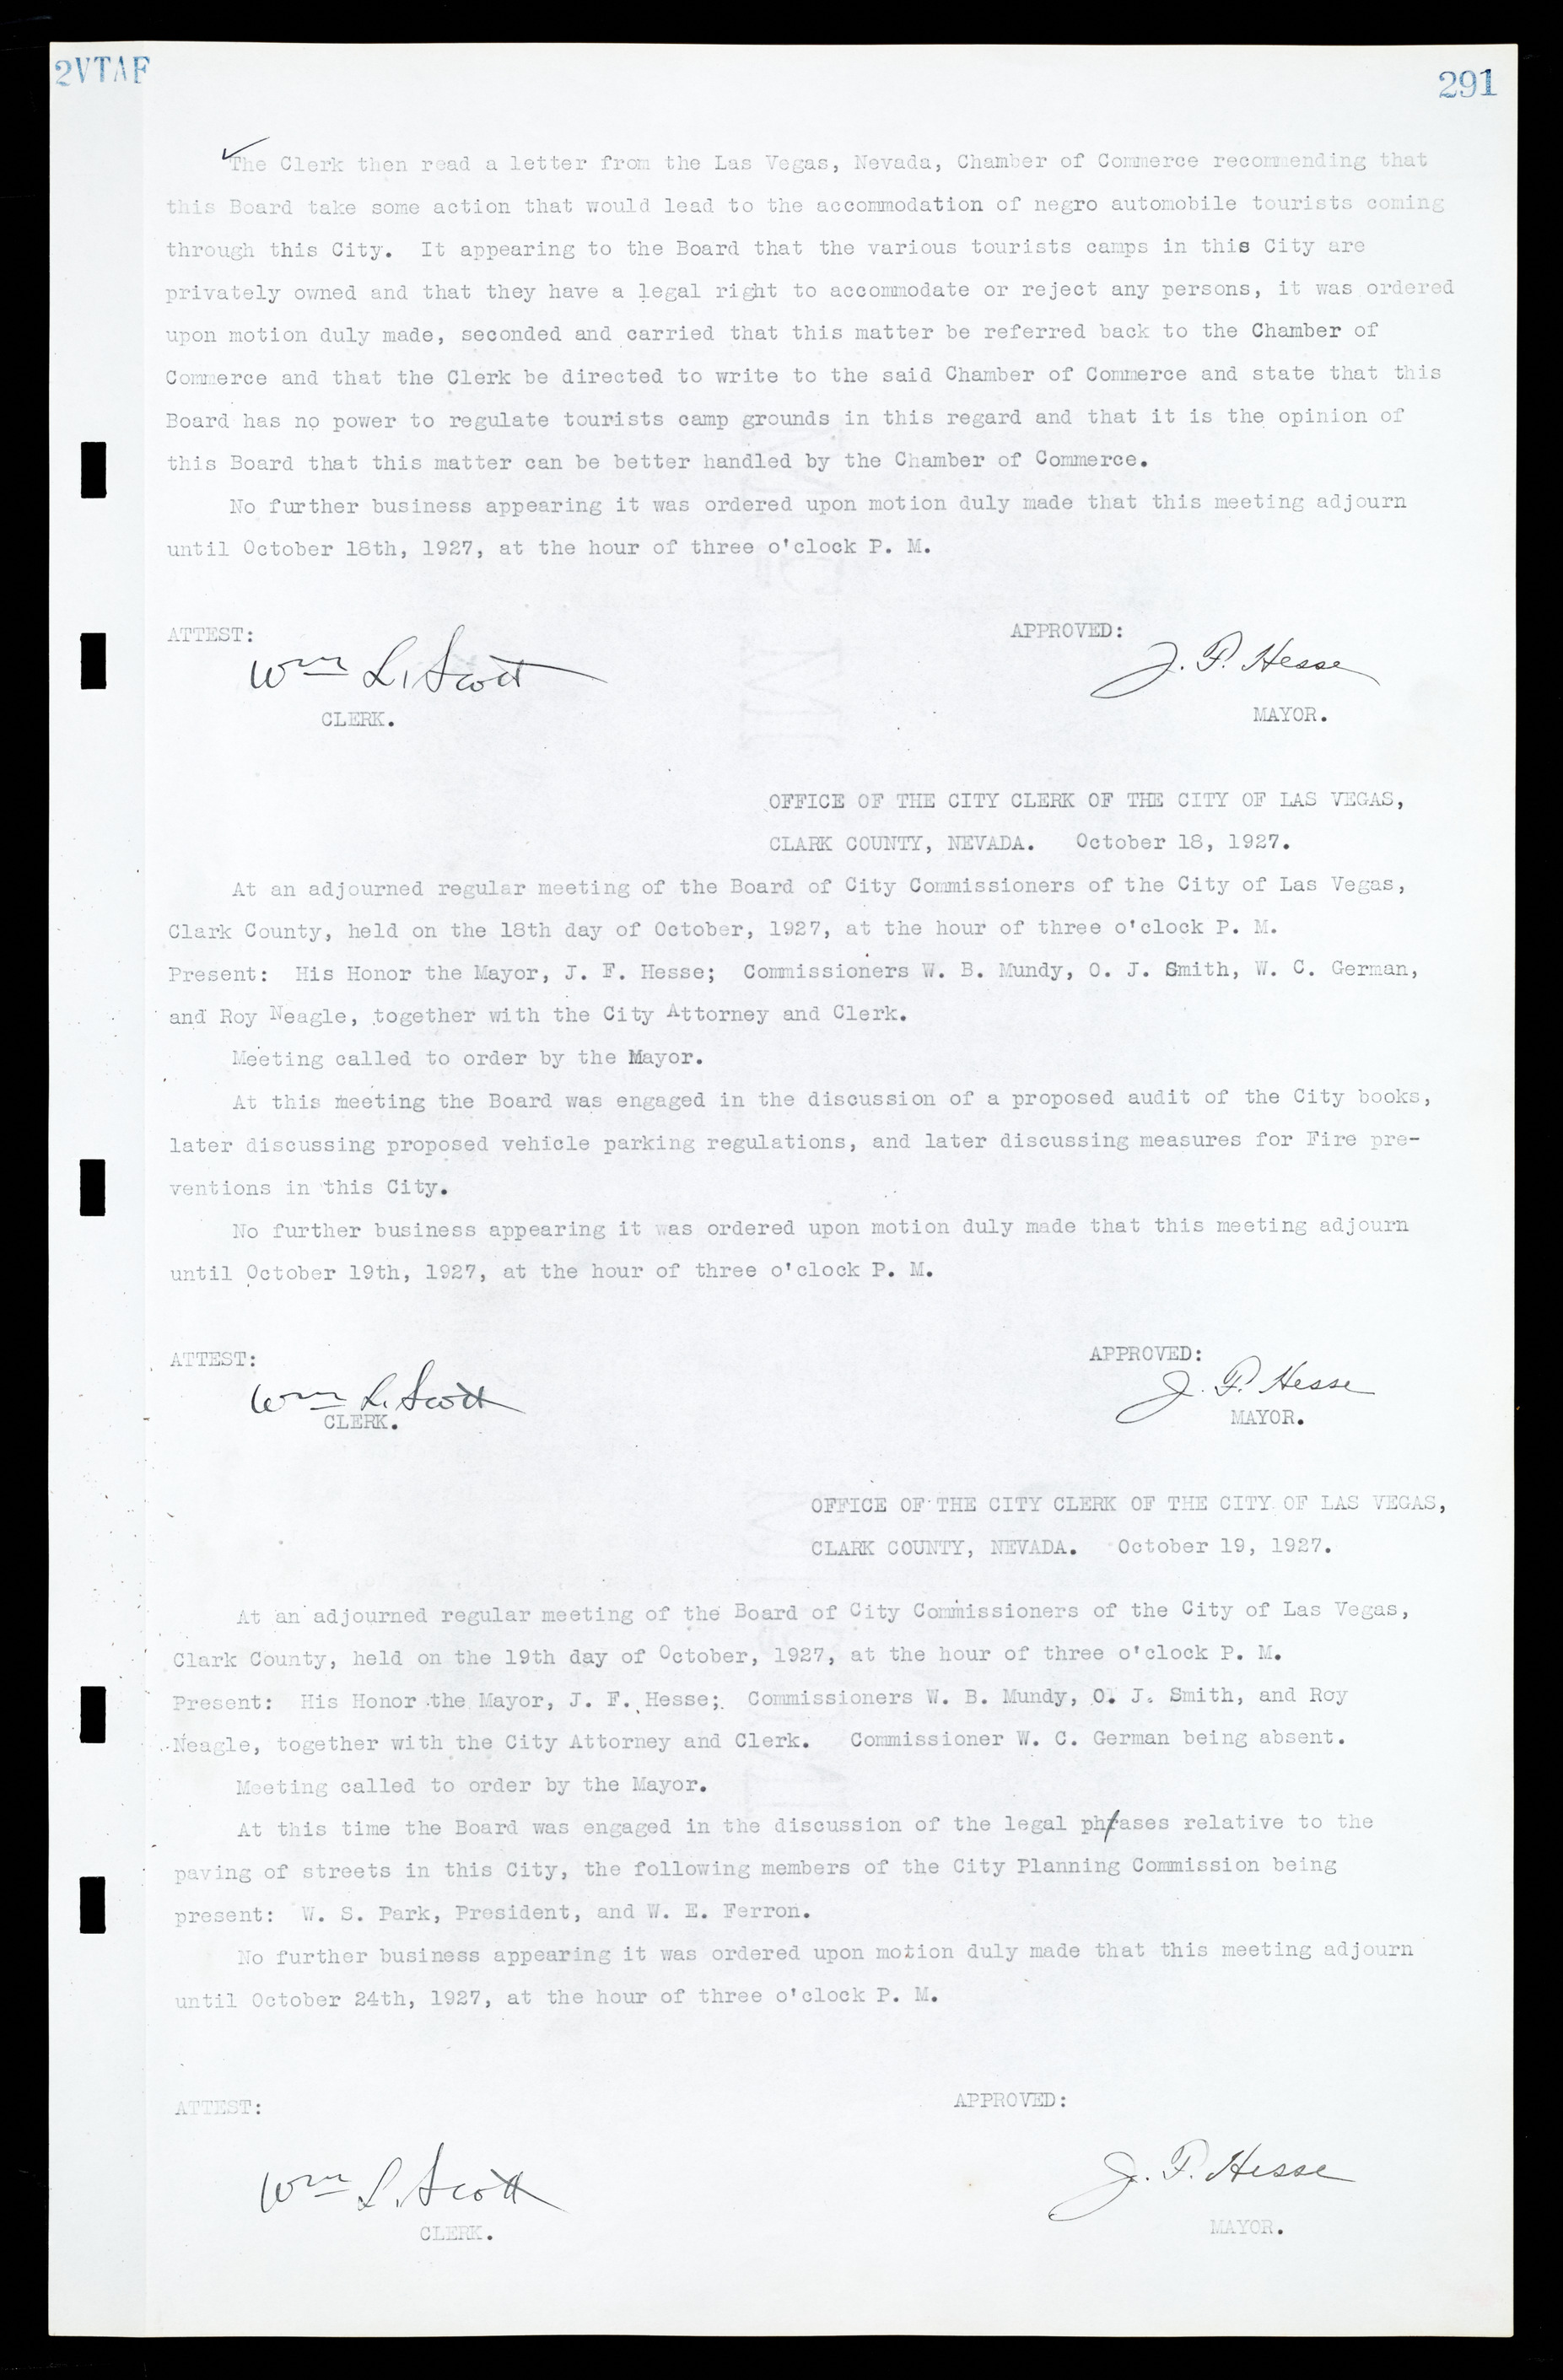 Las Vegas City Commission Minutes, March 1, 1922 to May 10, 1929, lvc000002-300